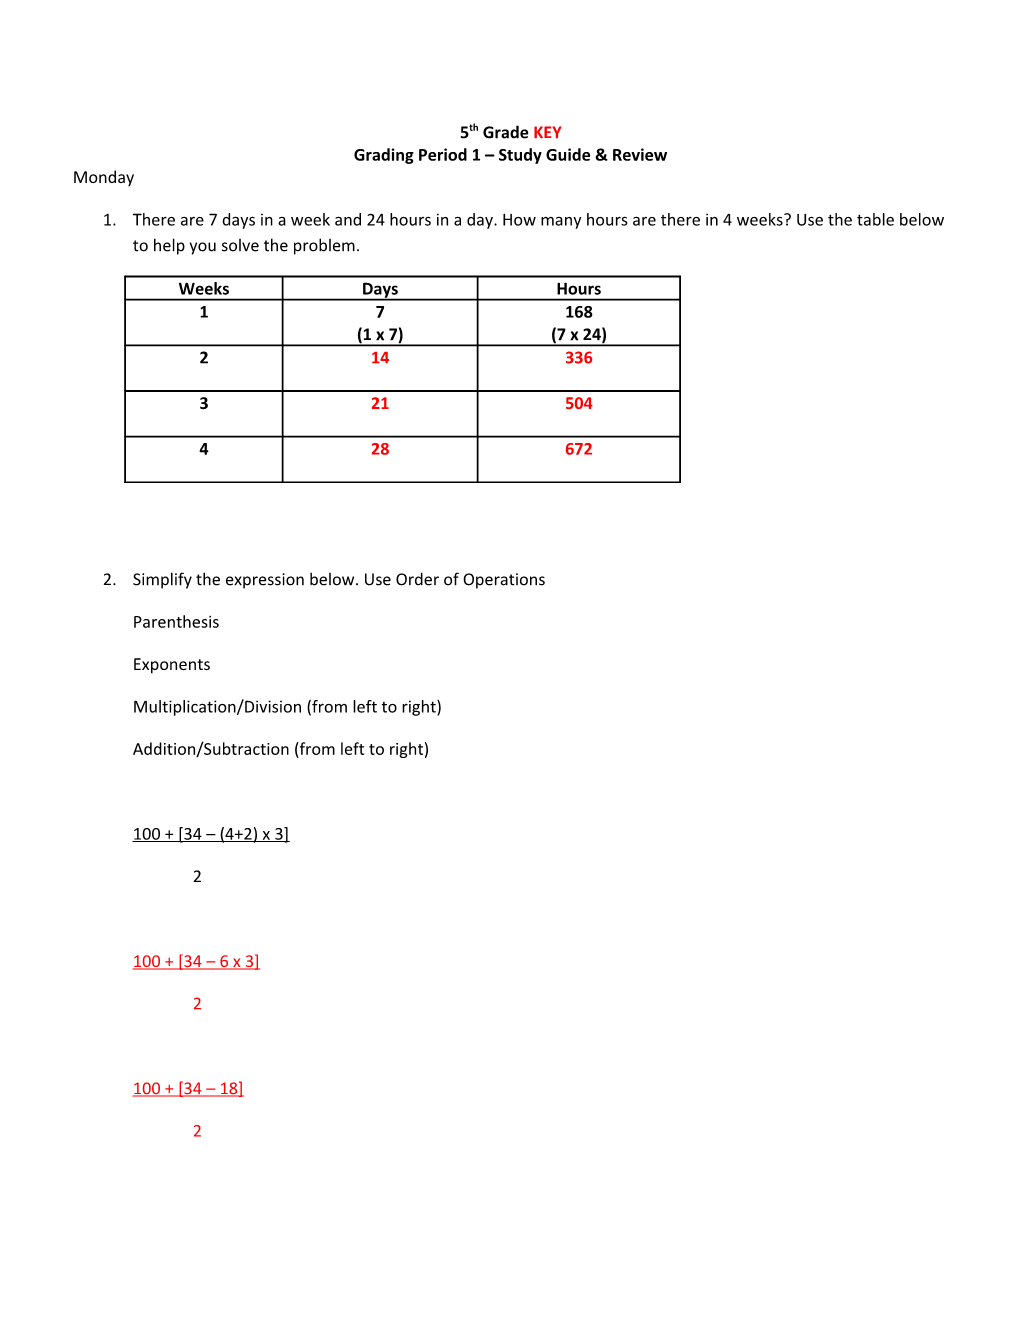 Grading Period 1 Study Guide & Review